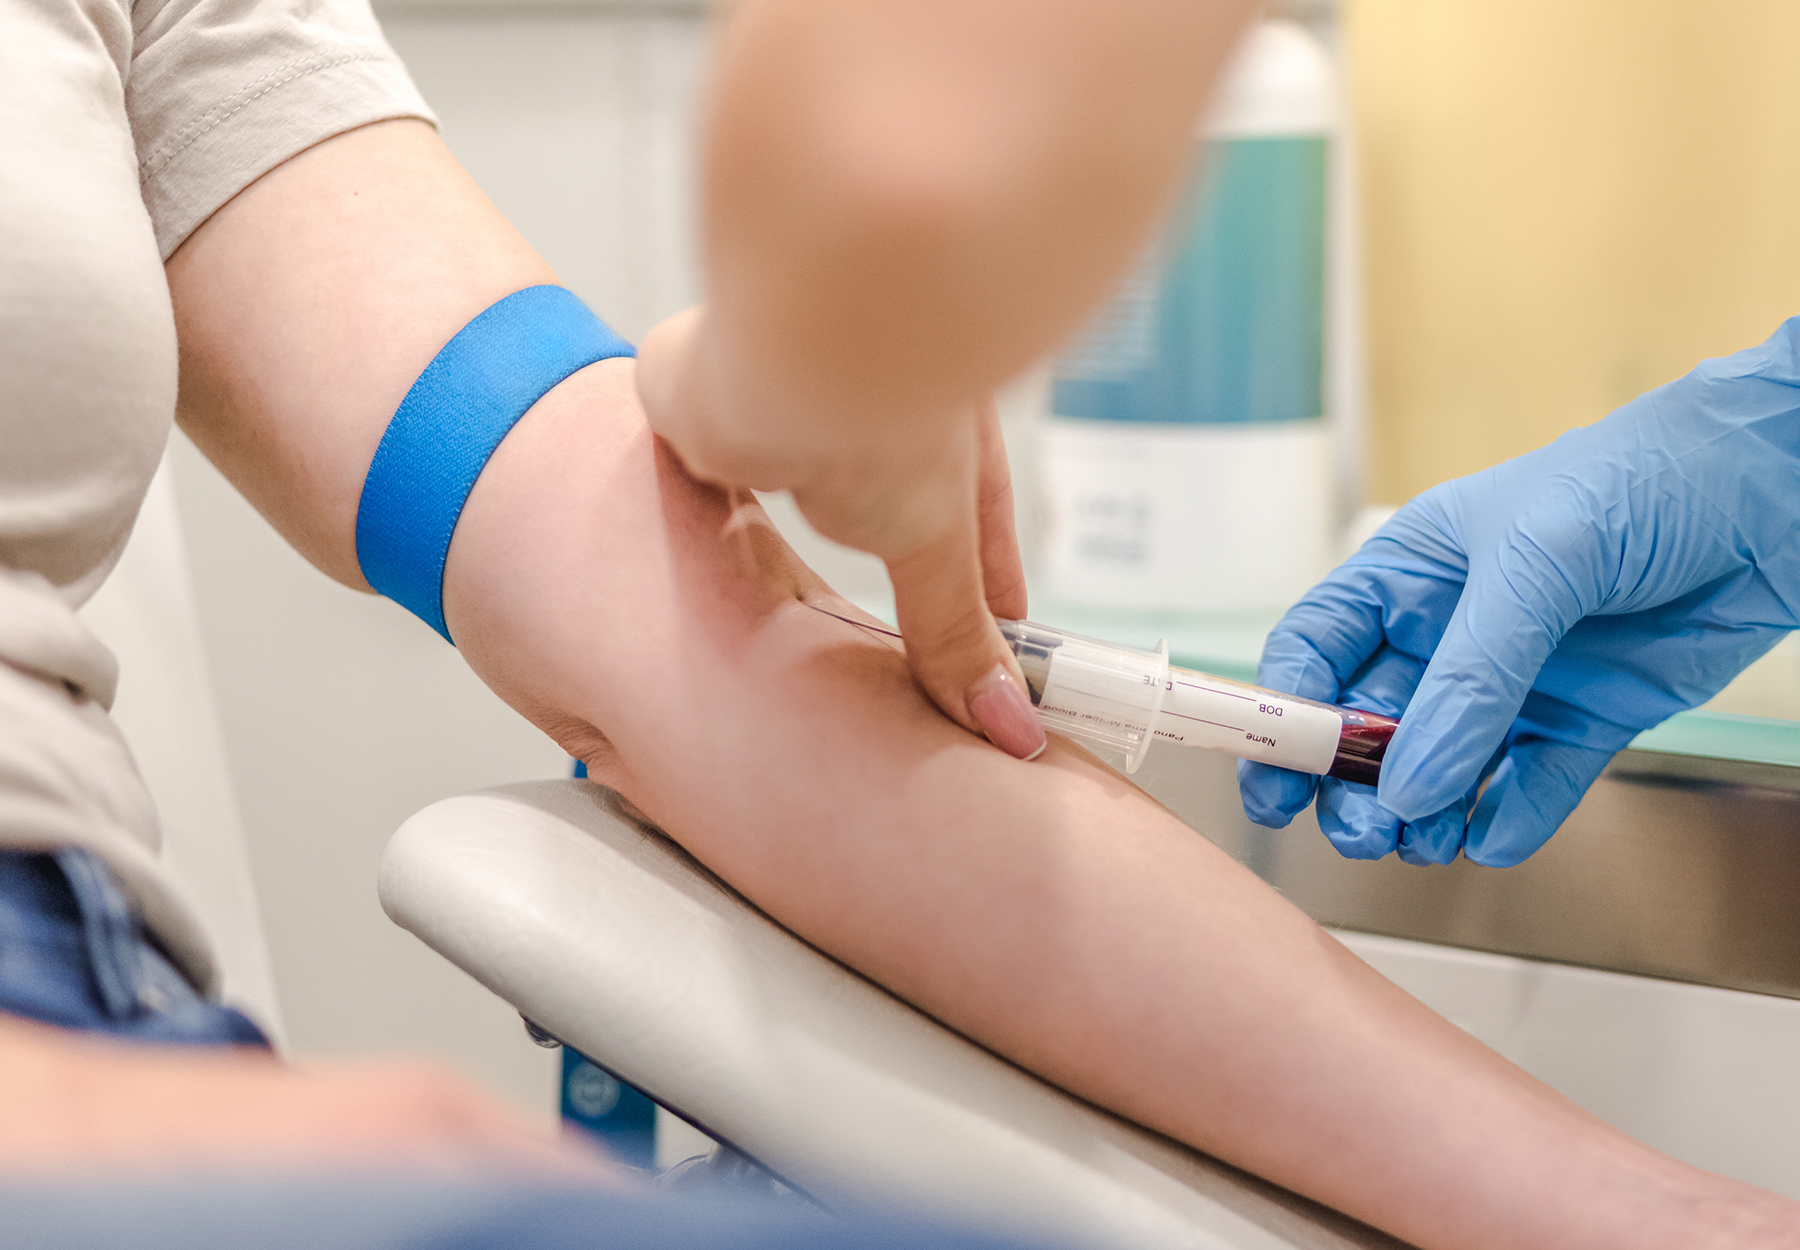 Close-up Of Doctor Taking Blood Sample From Patient's Arm in Hospital for Medical Testing. iStock image.